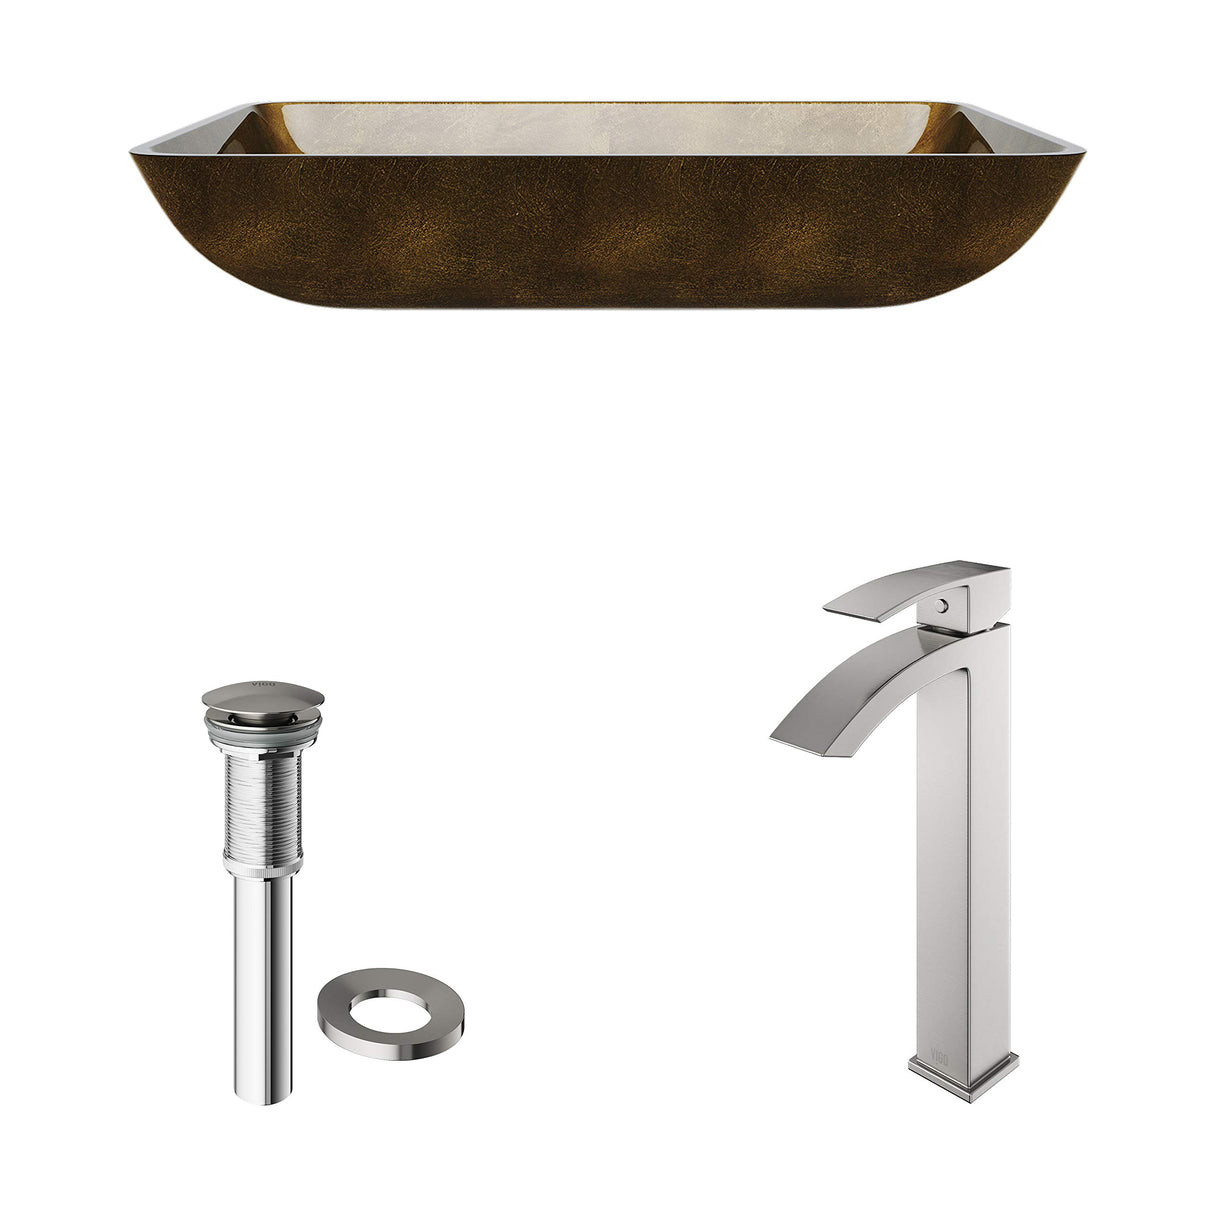 VIGO VGT513 22.25" L -14.25" W -12.0" H Handmade Countertop Glass Rectangle Vessel Bathroom Sink Set in Copper Finish with Brushed Nickel Single-Handle Single Hole Faucet and Pop Up Drain